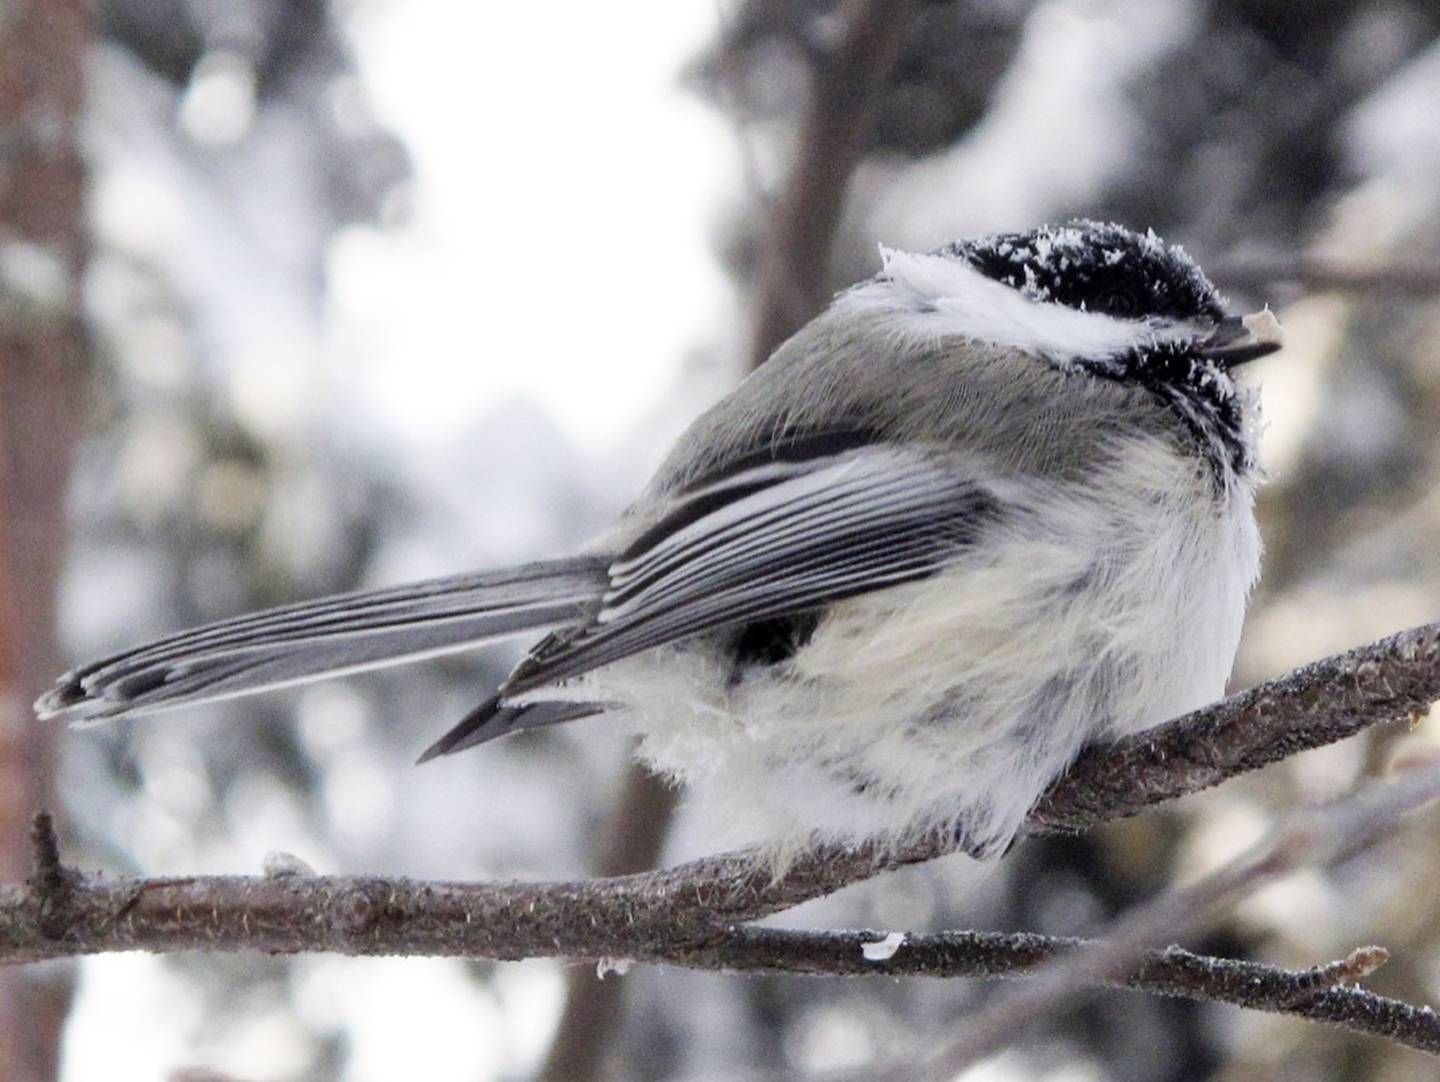 A black-capped chickadee holds a sunflower seed in its beak at 40 degrees below